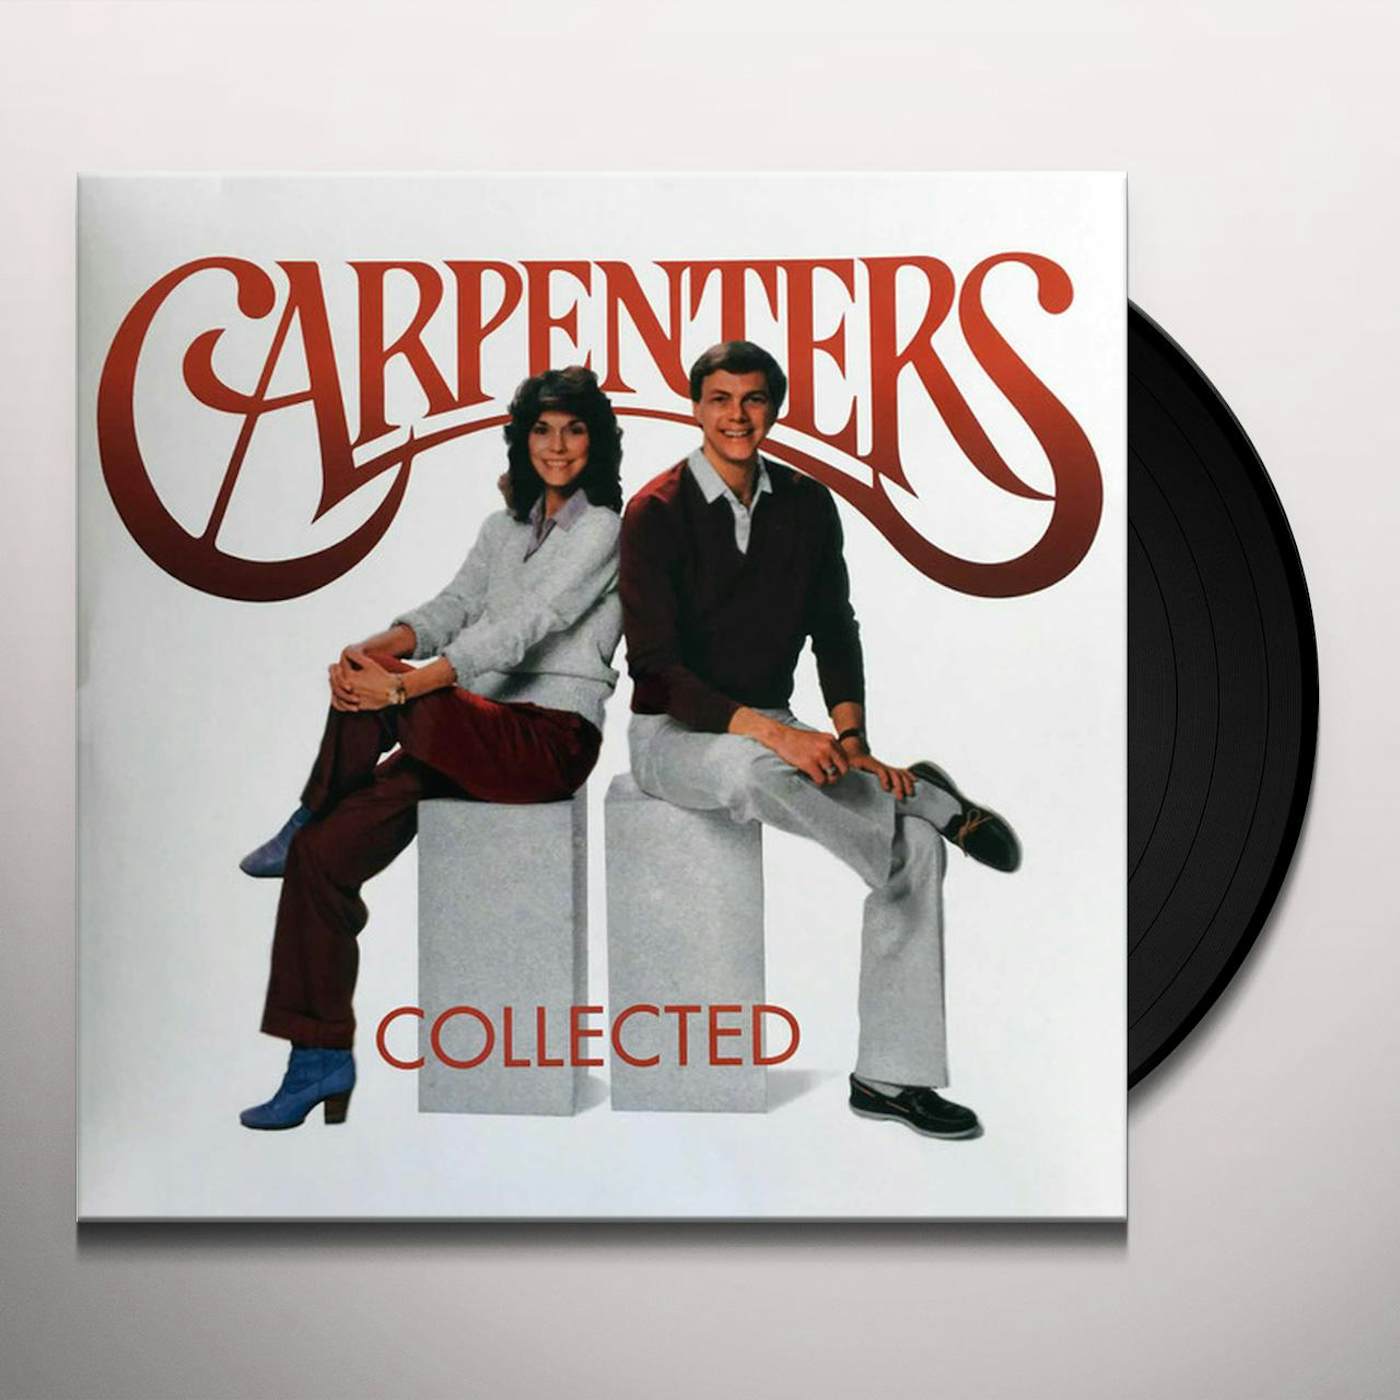 Carpenters COLLECTED (2LP/180G/PVC SLEEVE/BOOKLET/IMPORT) Vinyl Record